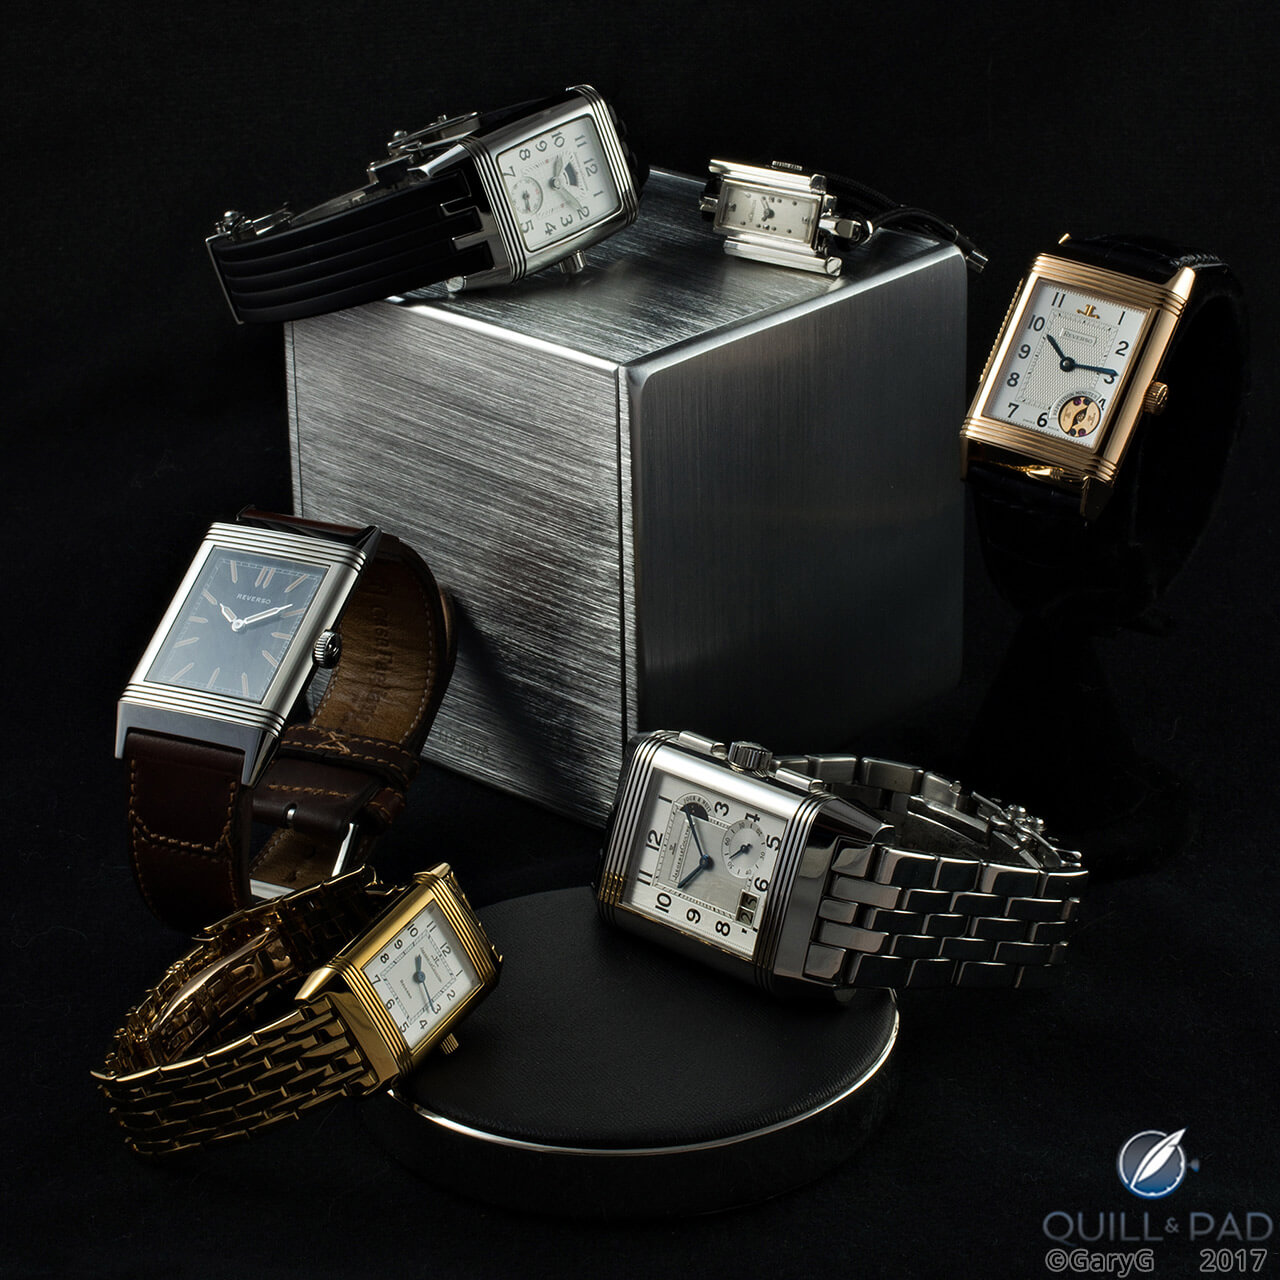 Hip to be square: rectangular Jaeger-LeCoultre watches